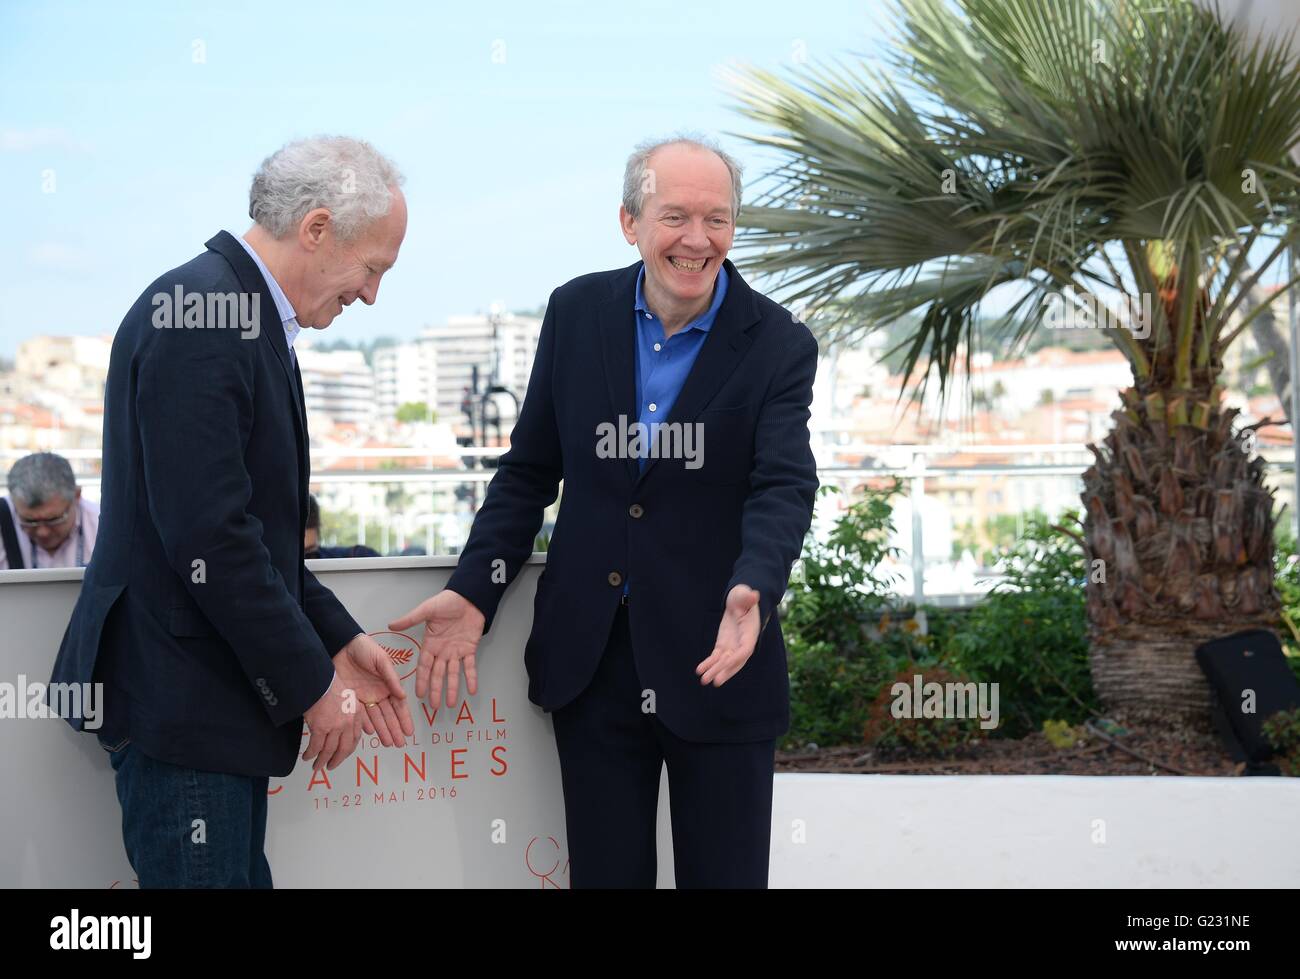 2850512 05/18/2016 Belgian directors Jean-Pierre Dardenne, left, and Luc Dardenne during a photo call for the movie La Fille Inconnue at the 69th Cannes Film Festival. Ekaterina Chesnokova/Sputnik |/picture alliance Stock Photo